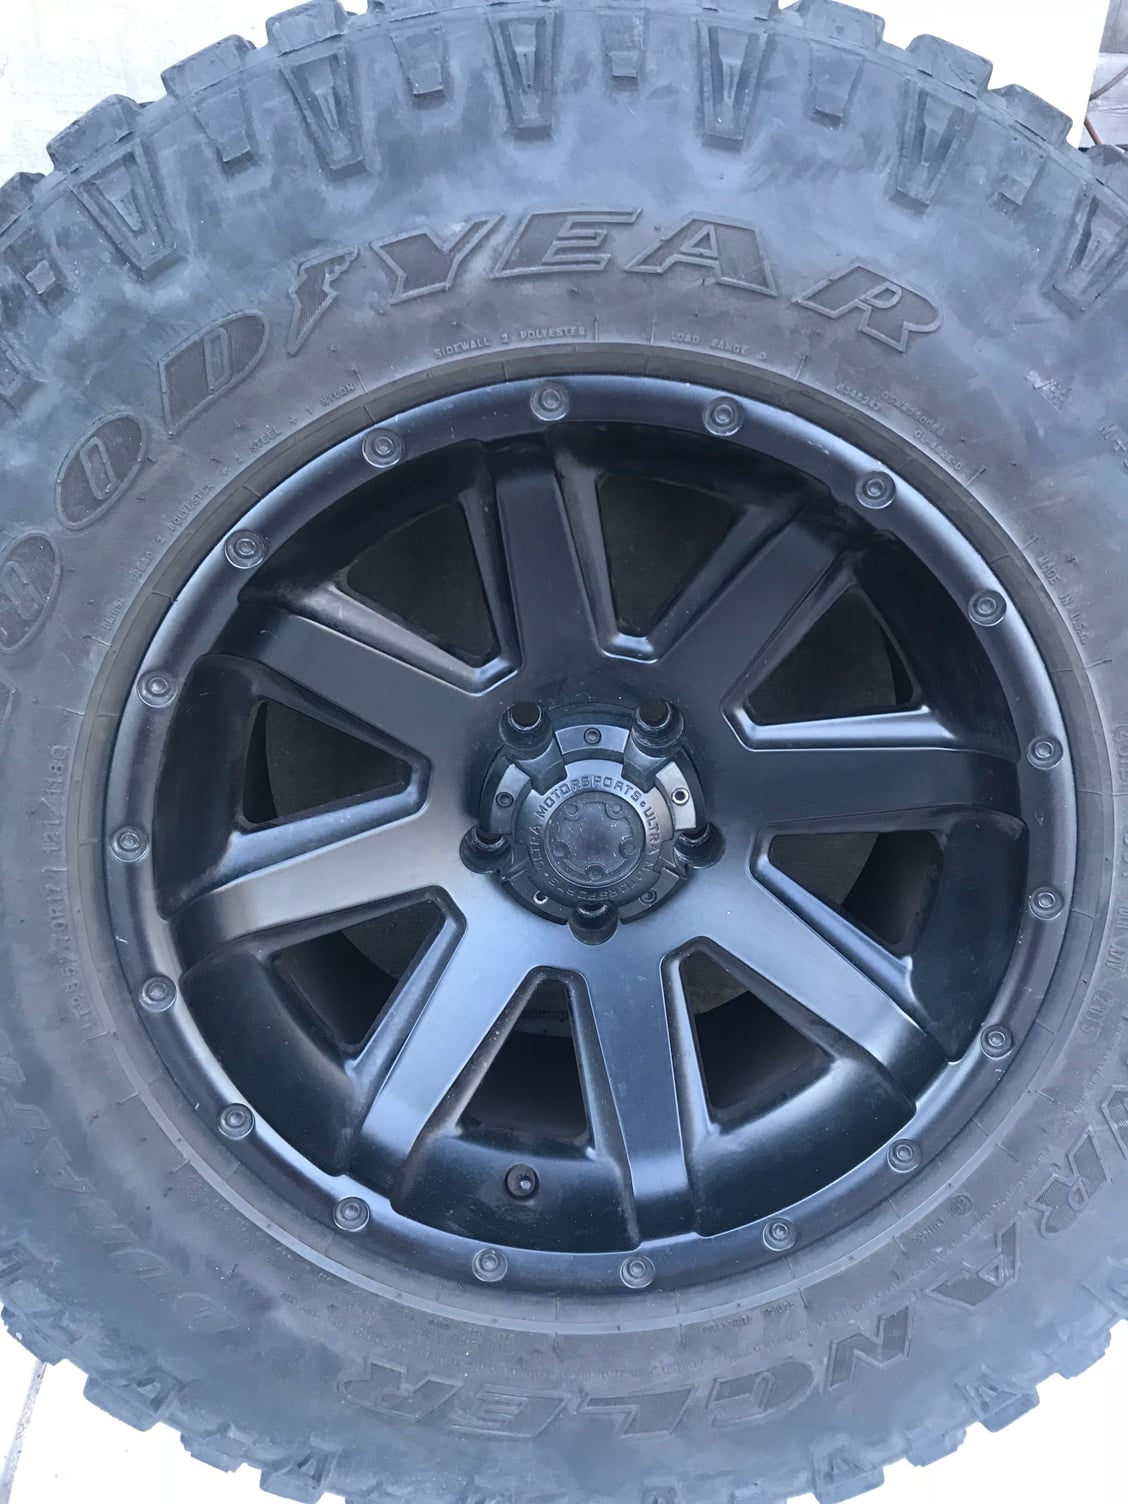 Wheels and Tires/Axles - FS: Set of 4 17 inch Ultra Crusher wheels and tires - Used - 2006 to 2017 Jeep Wrangler - Brooklyn, NY 11223, United States